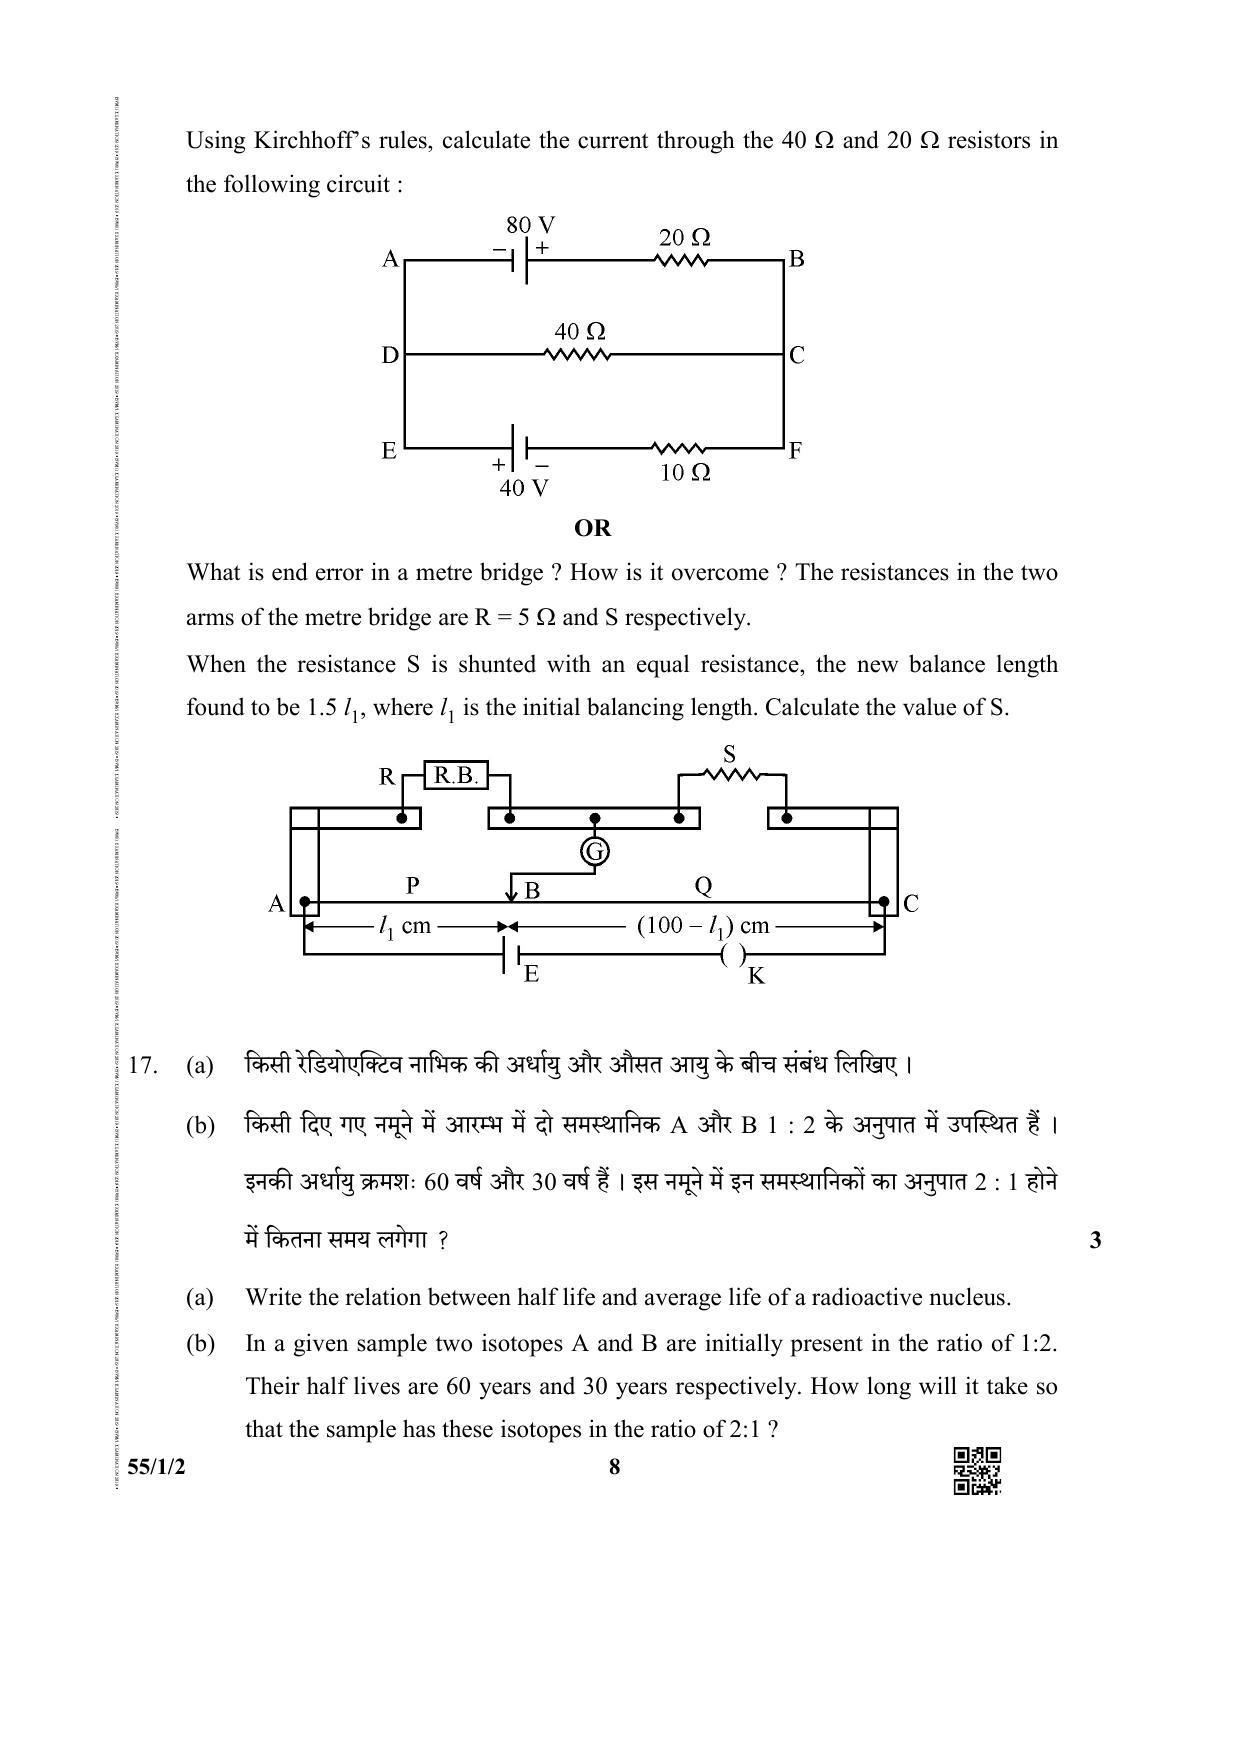 CBSE Class 12 55-1-2 (Physics) 2019 Question Paper - Page 8